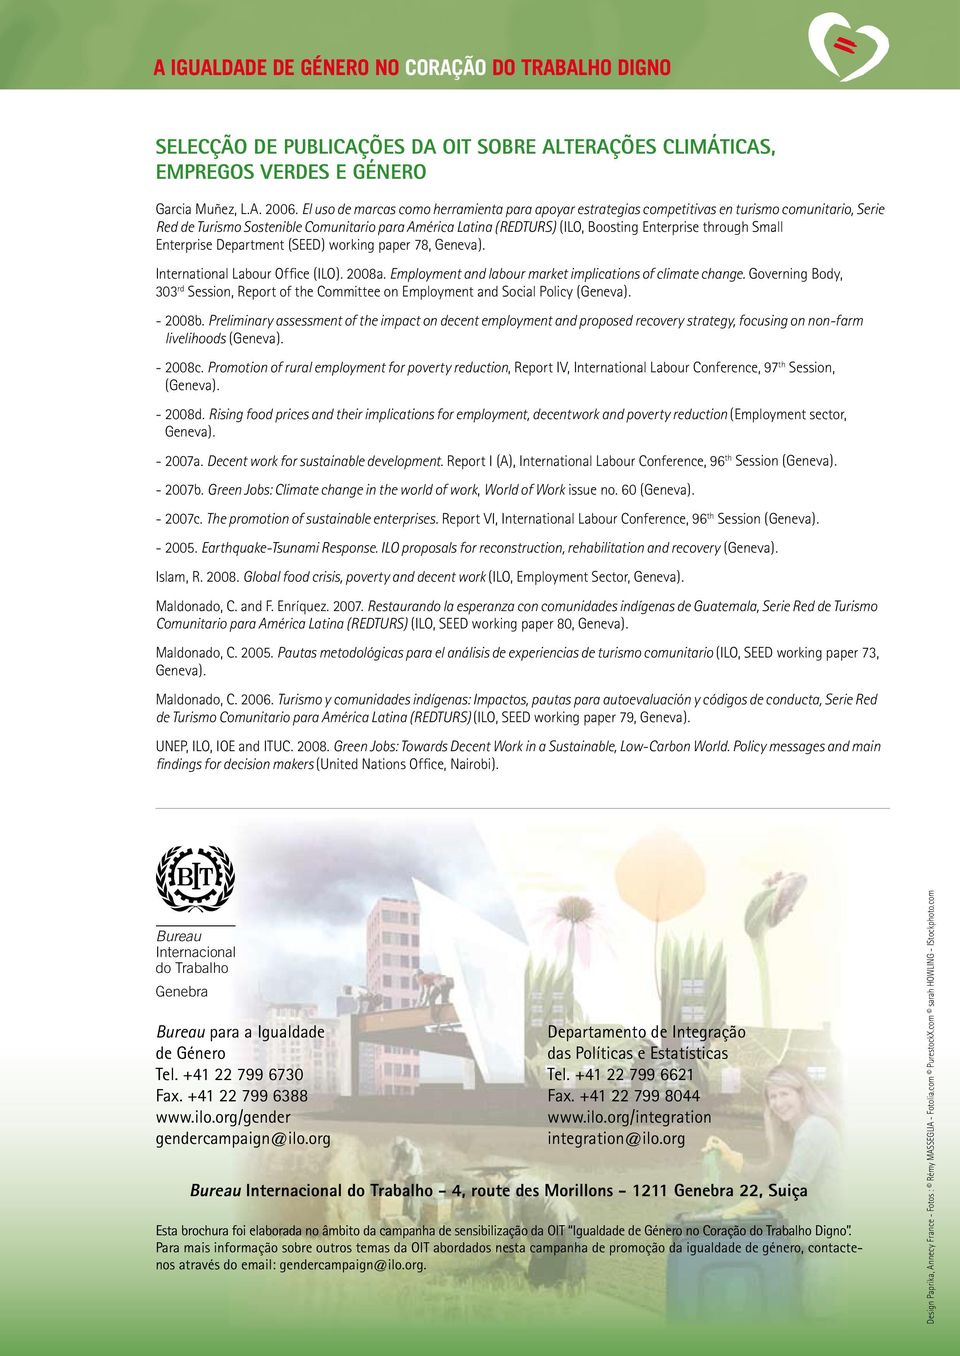 through Small Enterprise Department (SEED) working paper 78, Geneva). International Labour Office (ILO). 2008a. Employment and labour market implications of climate change.